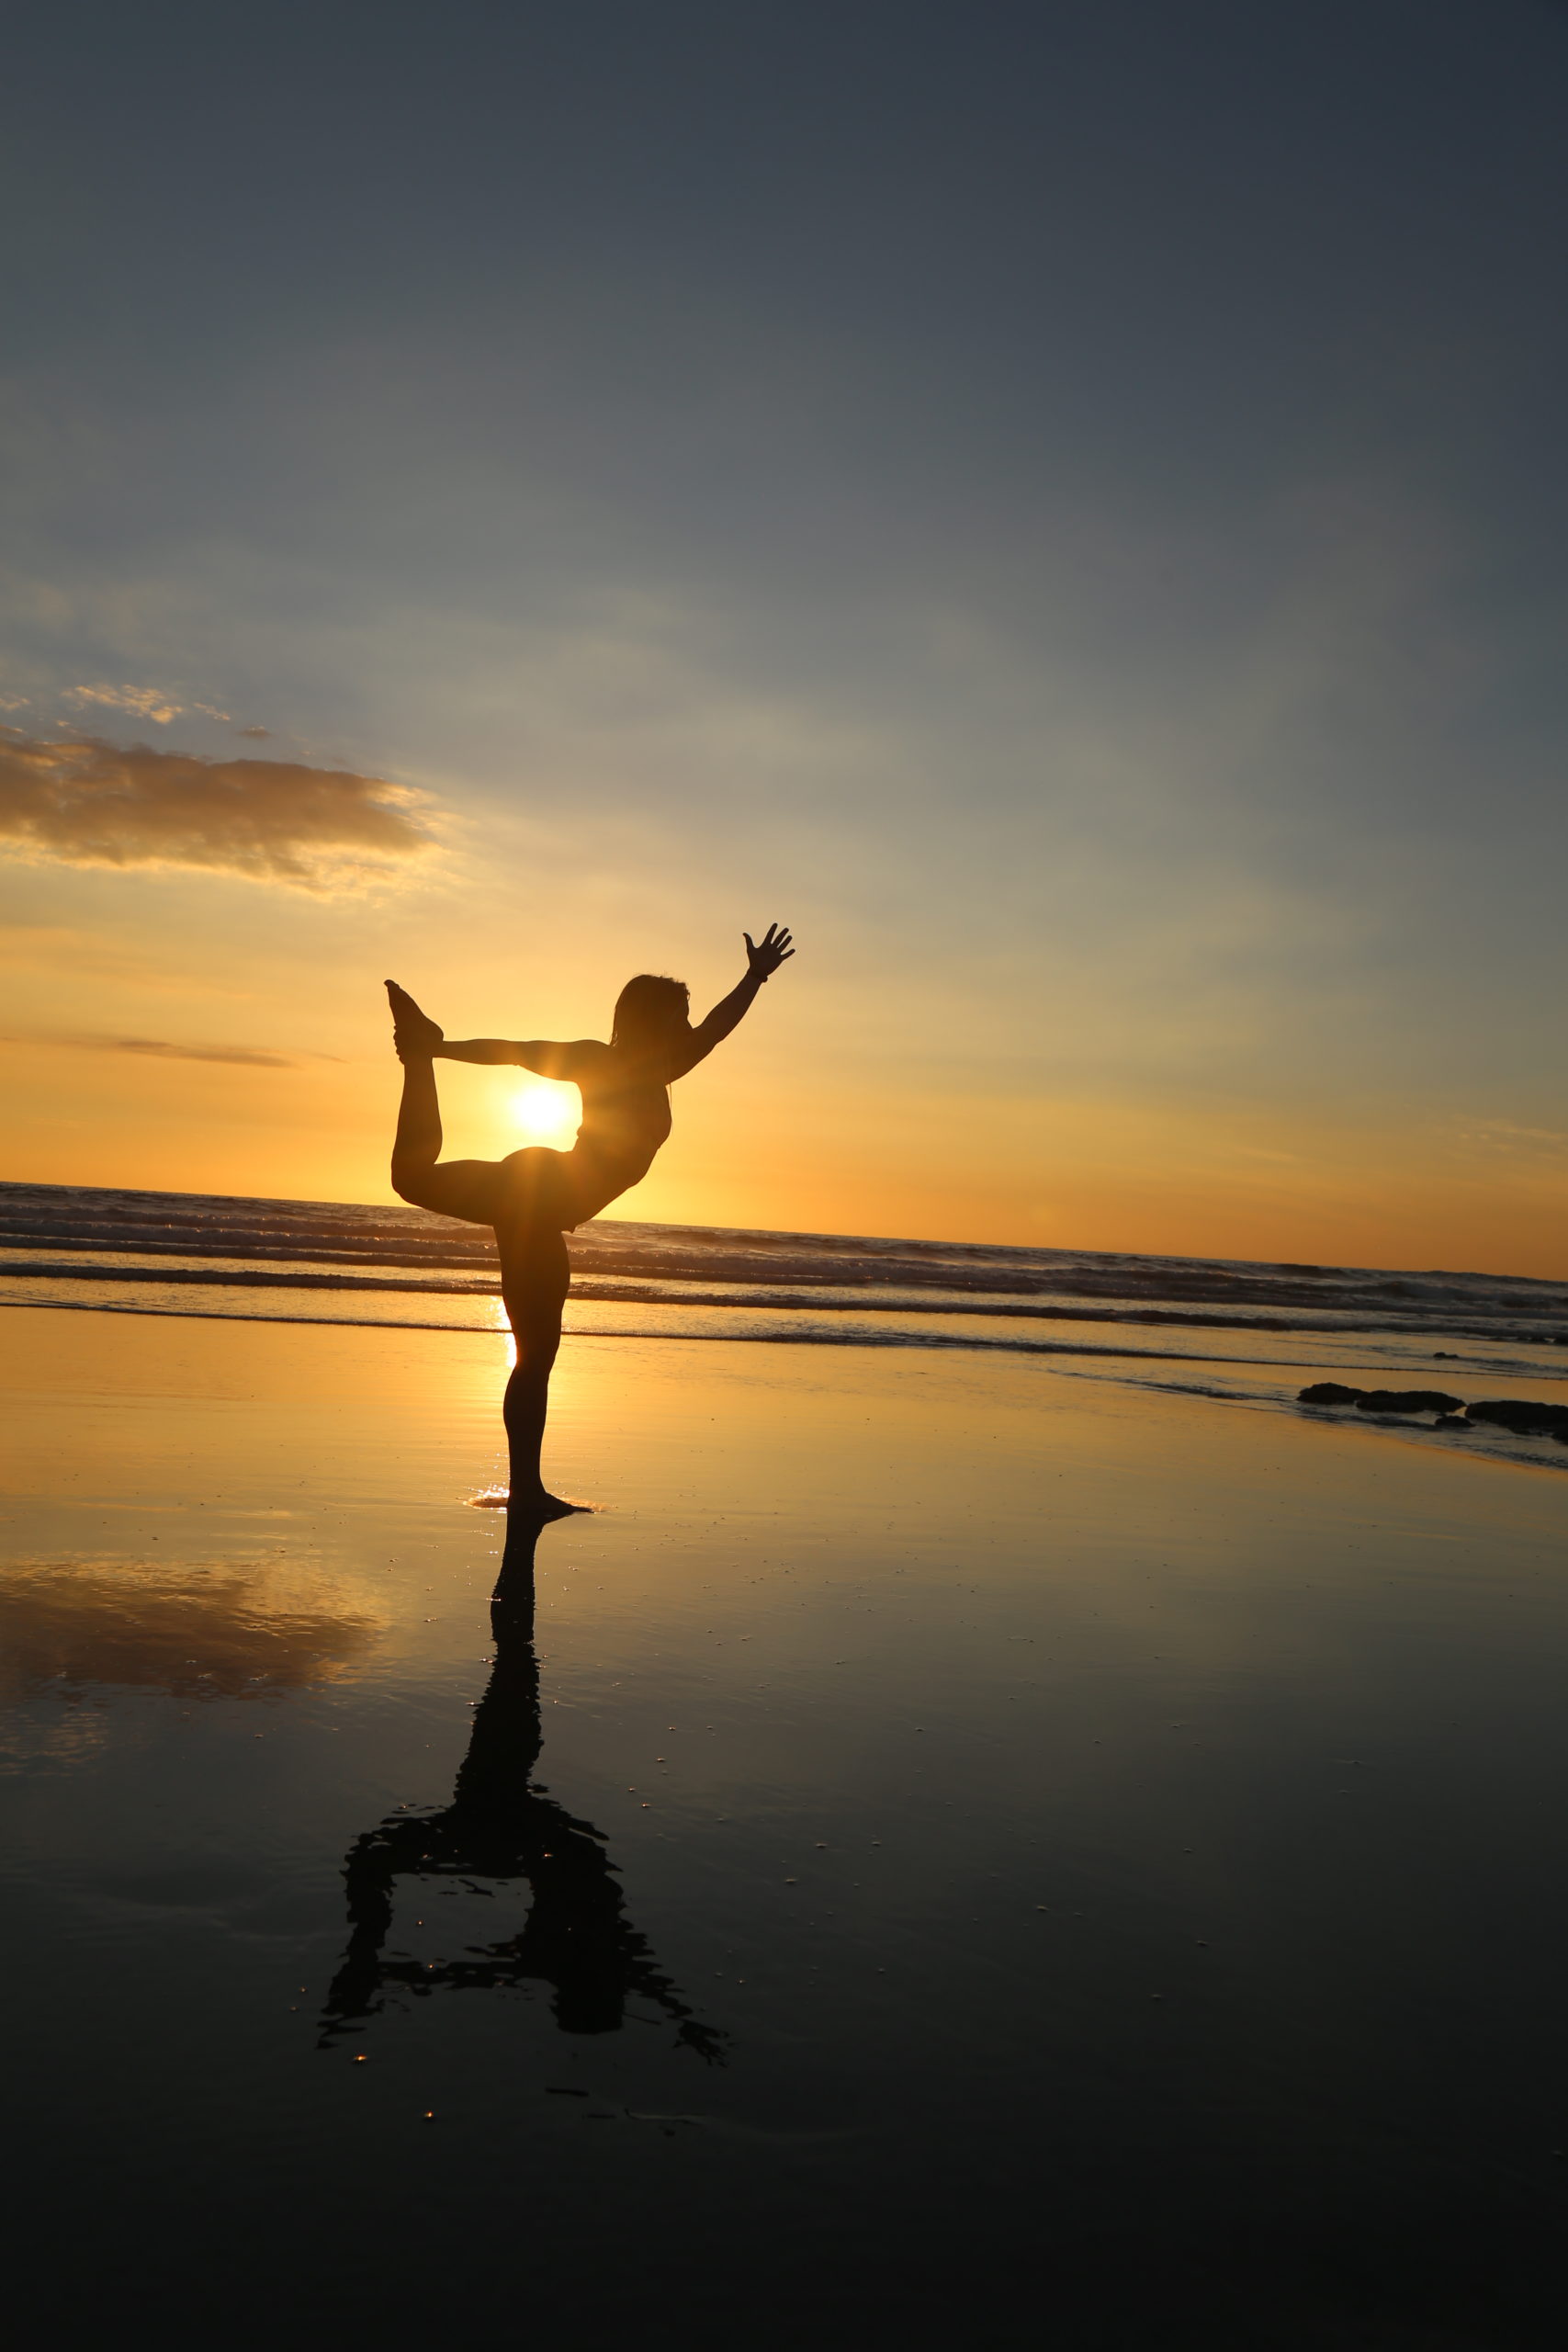 Silhouette of yogi on the beach at sunset in dancer pose